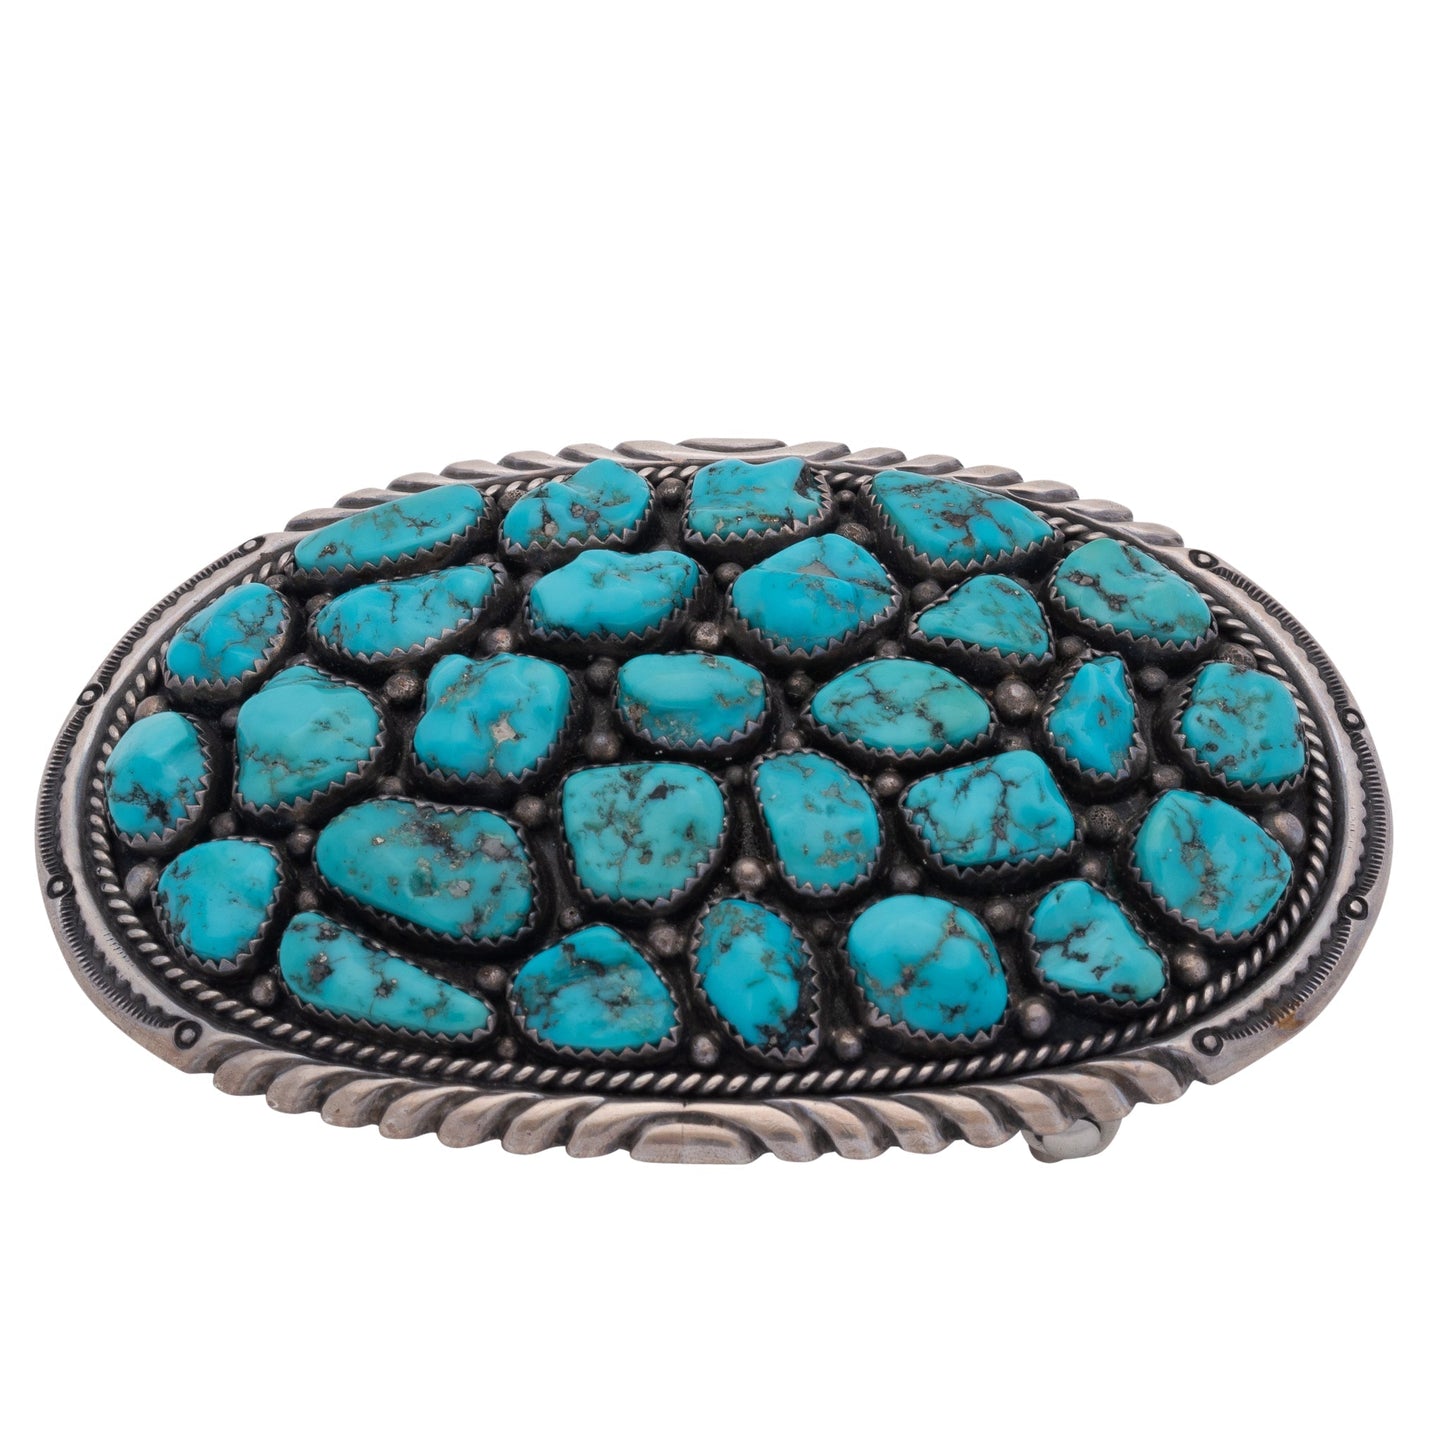 Vintage Navajo Belt Buckle With Turquoise Nuggets by Wilford Nez - Turquoise & Tufa